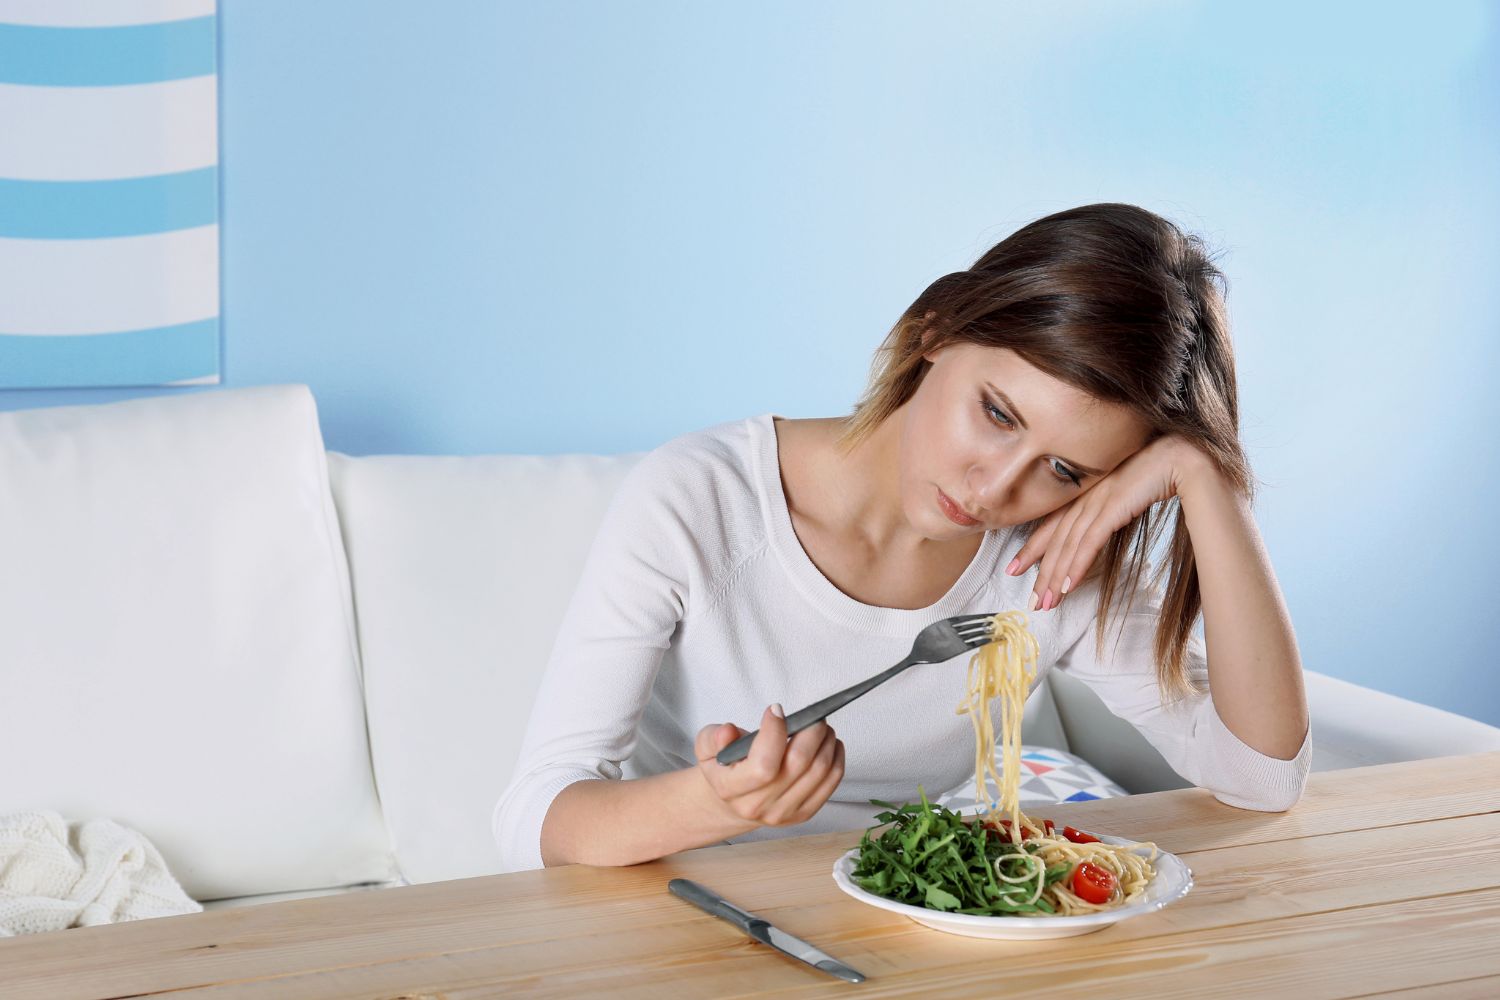 Finding Help Online Eating Disorder Therapy